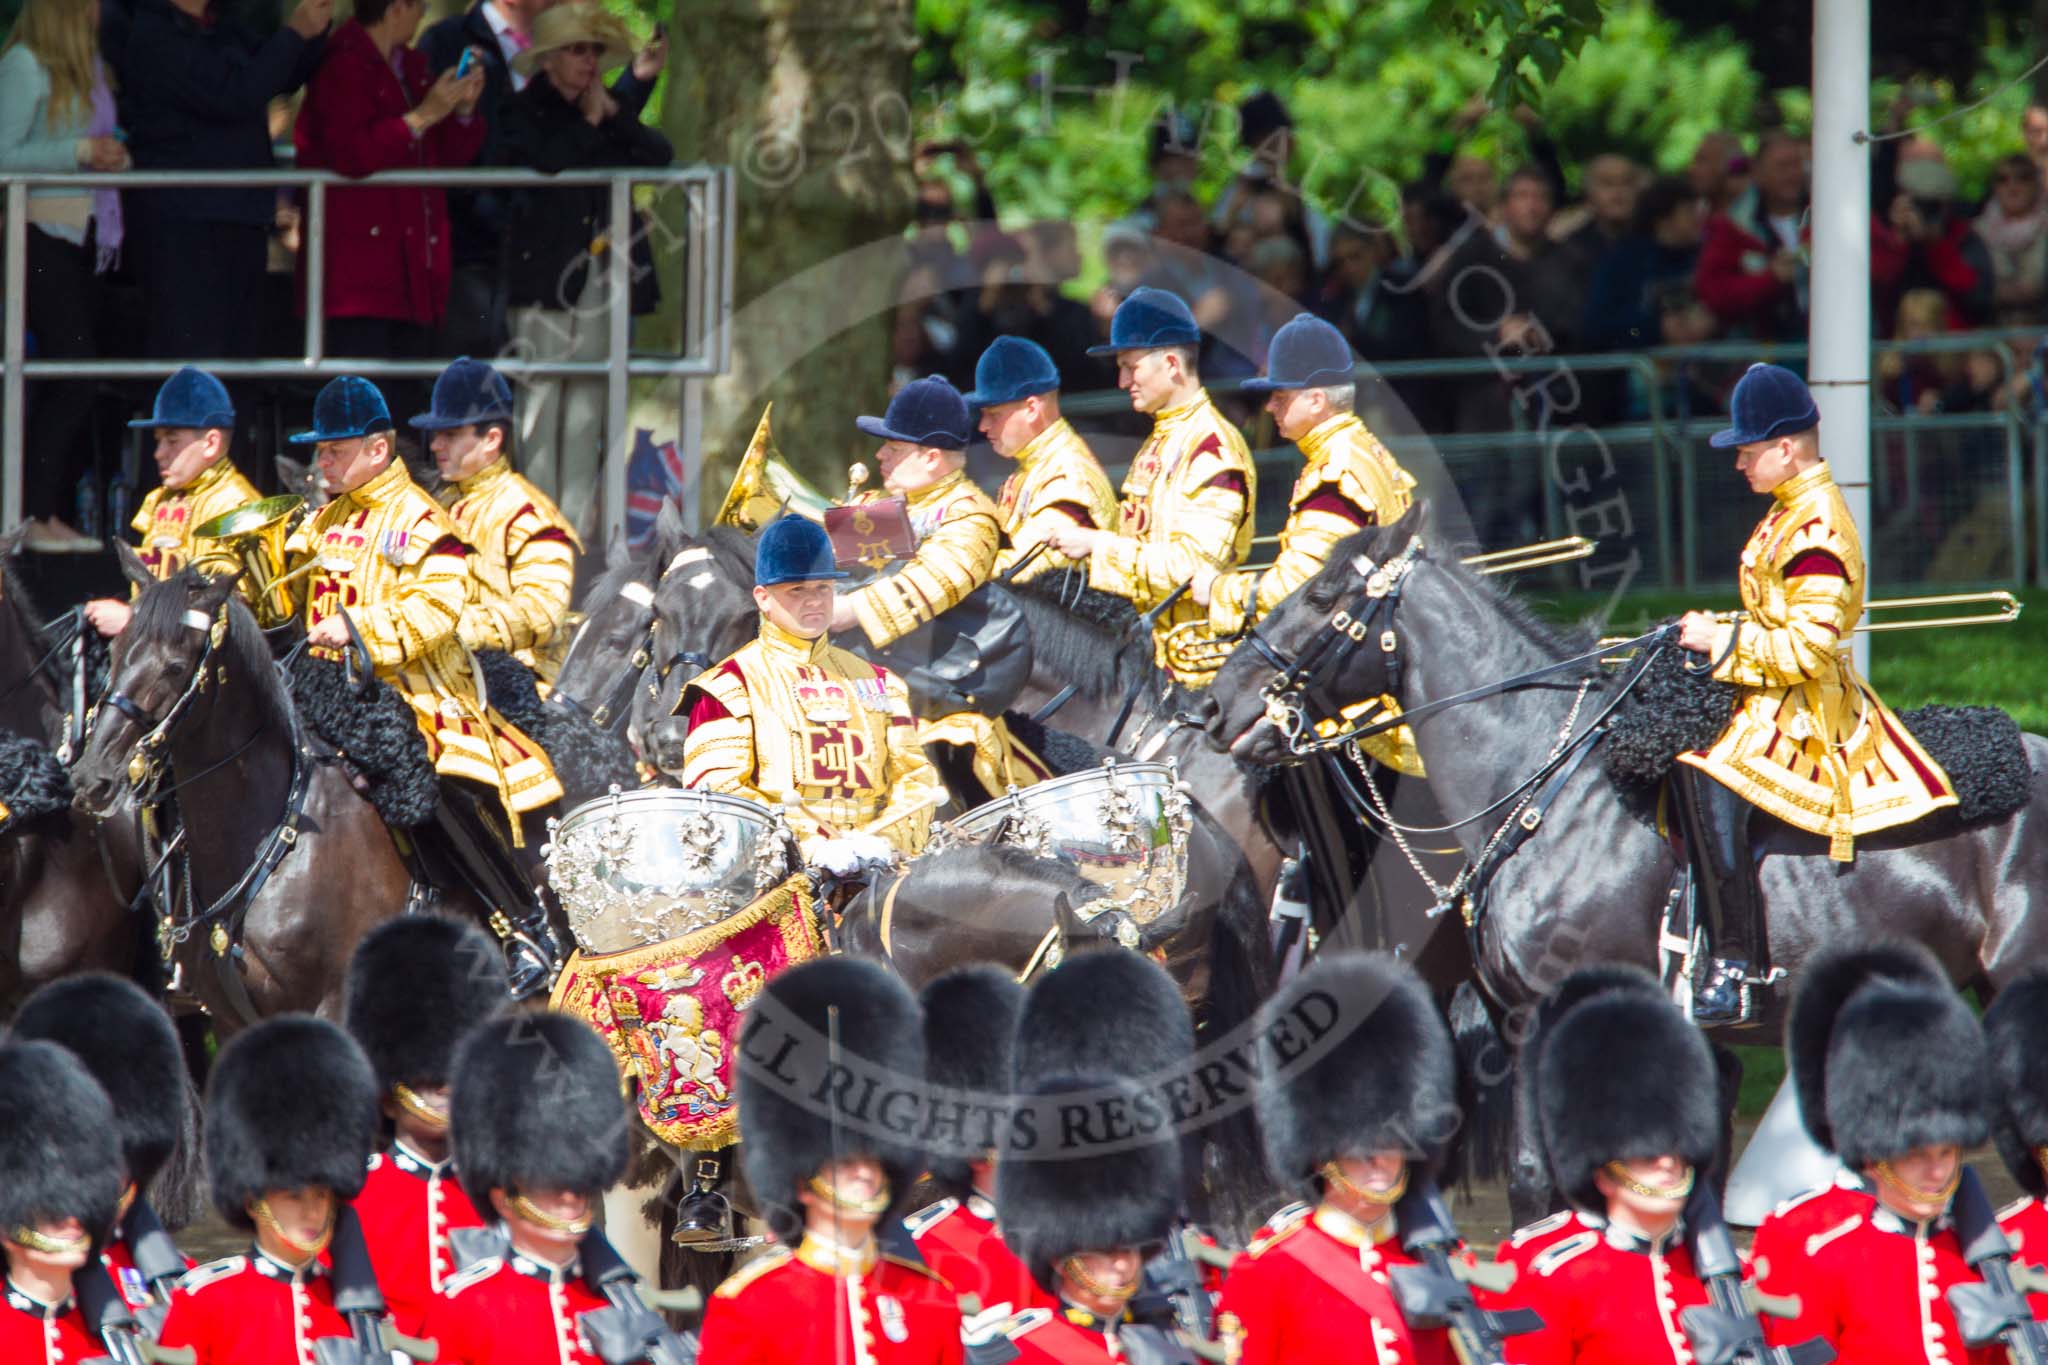 Trooping the Colour 2013: The Mounted Bands of the Household Cavalry are marching down Horse Guards Road as the third element of the Royal Procession, taking position at the northern side of Horse Guards Parade, next to St James's Park. In the centre the Life Guard's Kettle Drummer. Image #243, 15 June 2013 10:57 Horse Guards Parade, London, UK